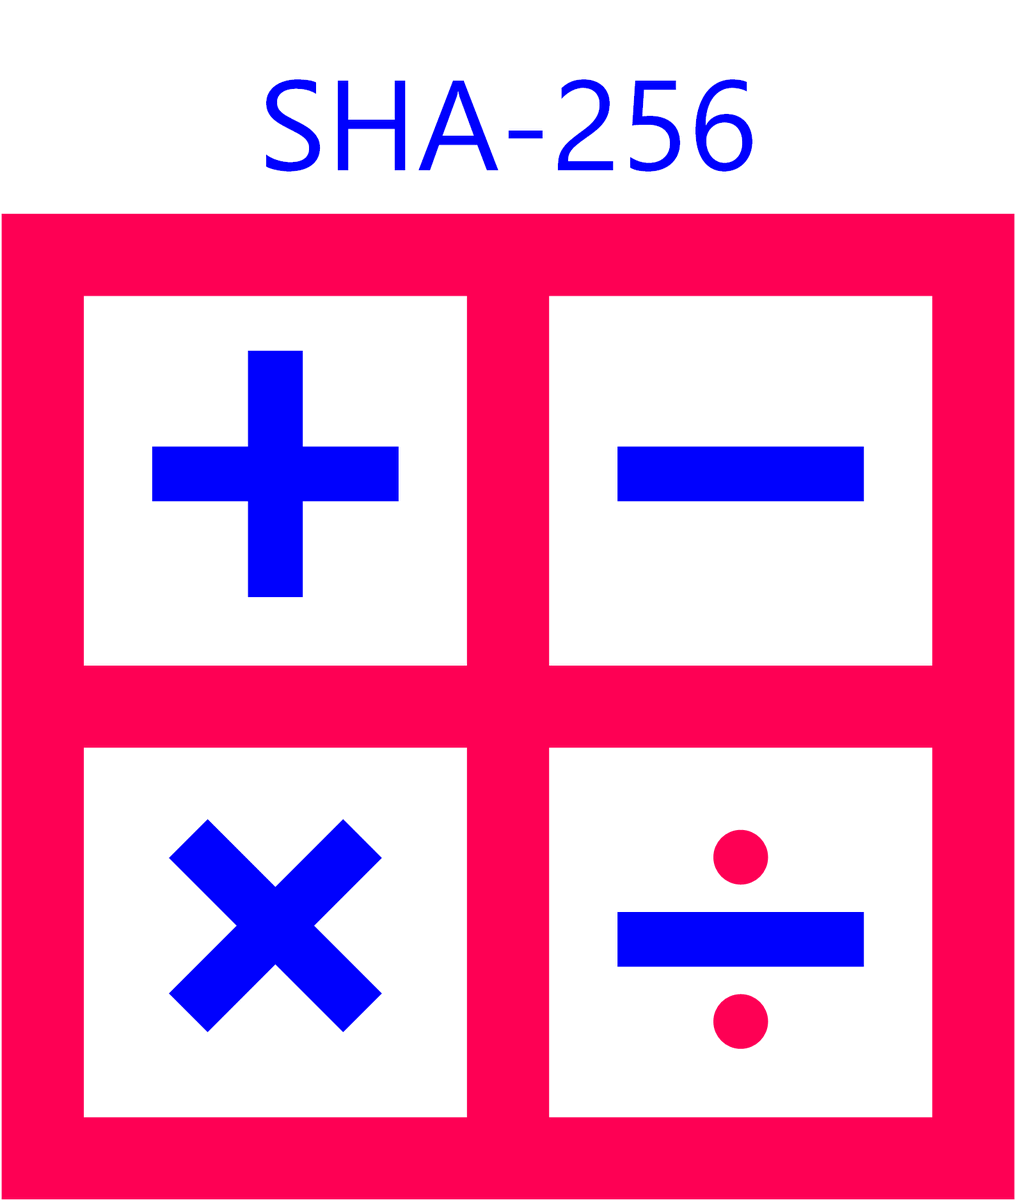 What does your name look like after #hashing with SHA-256?  🫣

GlobeBit = 14a6d89ed37f06029a10370cc6d7915eadc1ca68ac22897cdee56c6fa8798a26

The following page shows you the algorithm behind the #SecureHashAlgorithm-256 

sha256algorithm.com